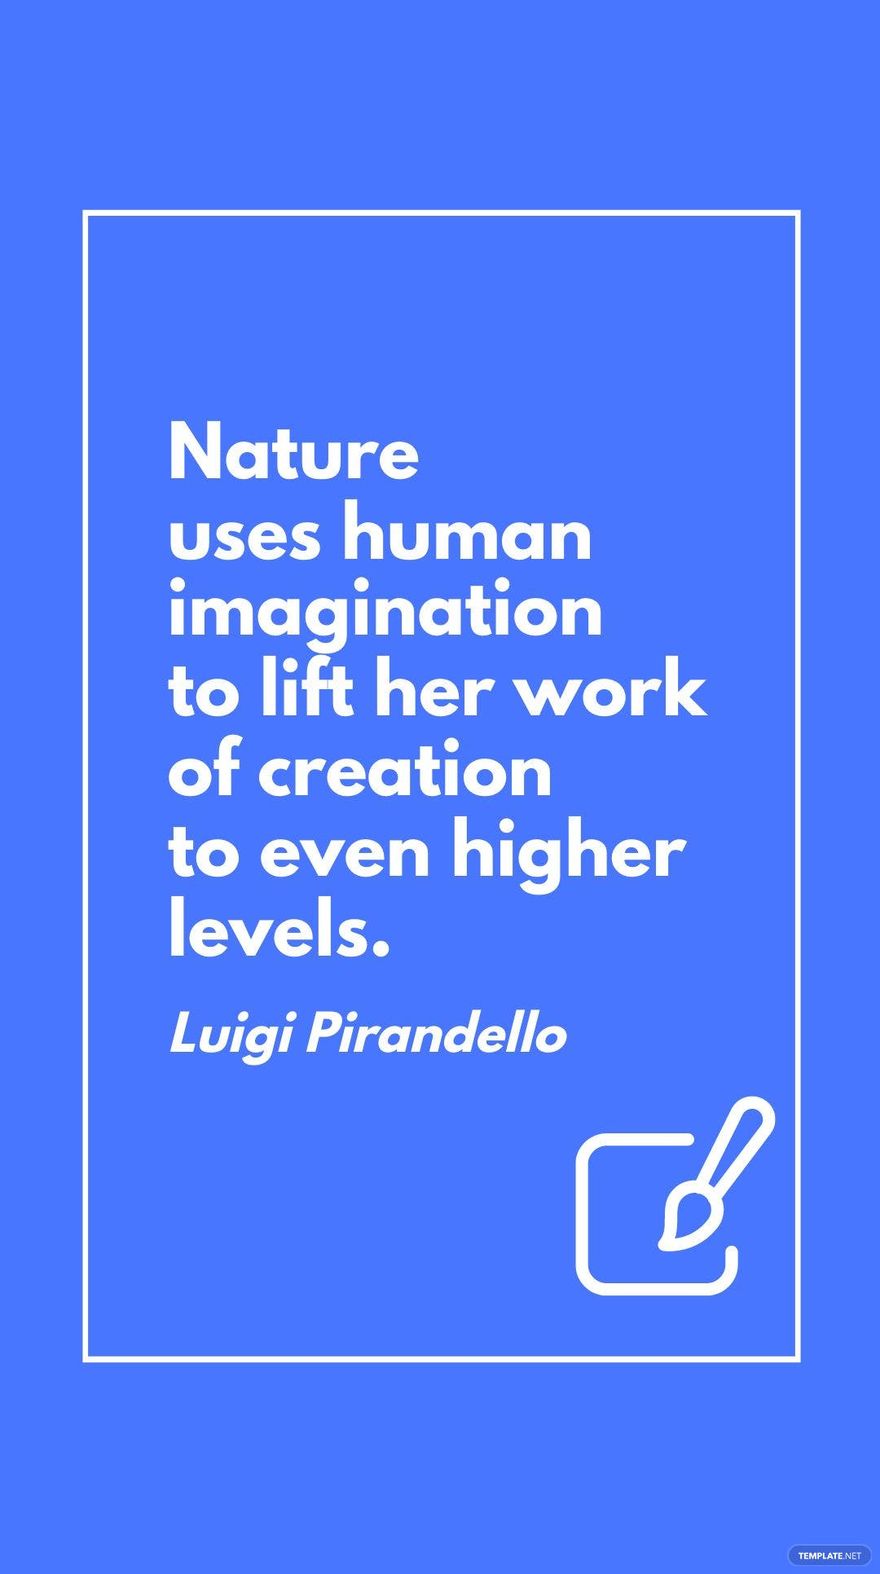 Luigi Pirandello - Nature uses human imagination to lift her work of creation to even higher levels.